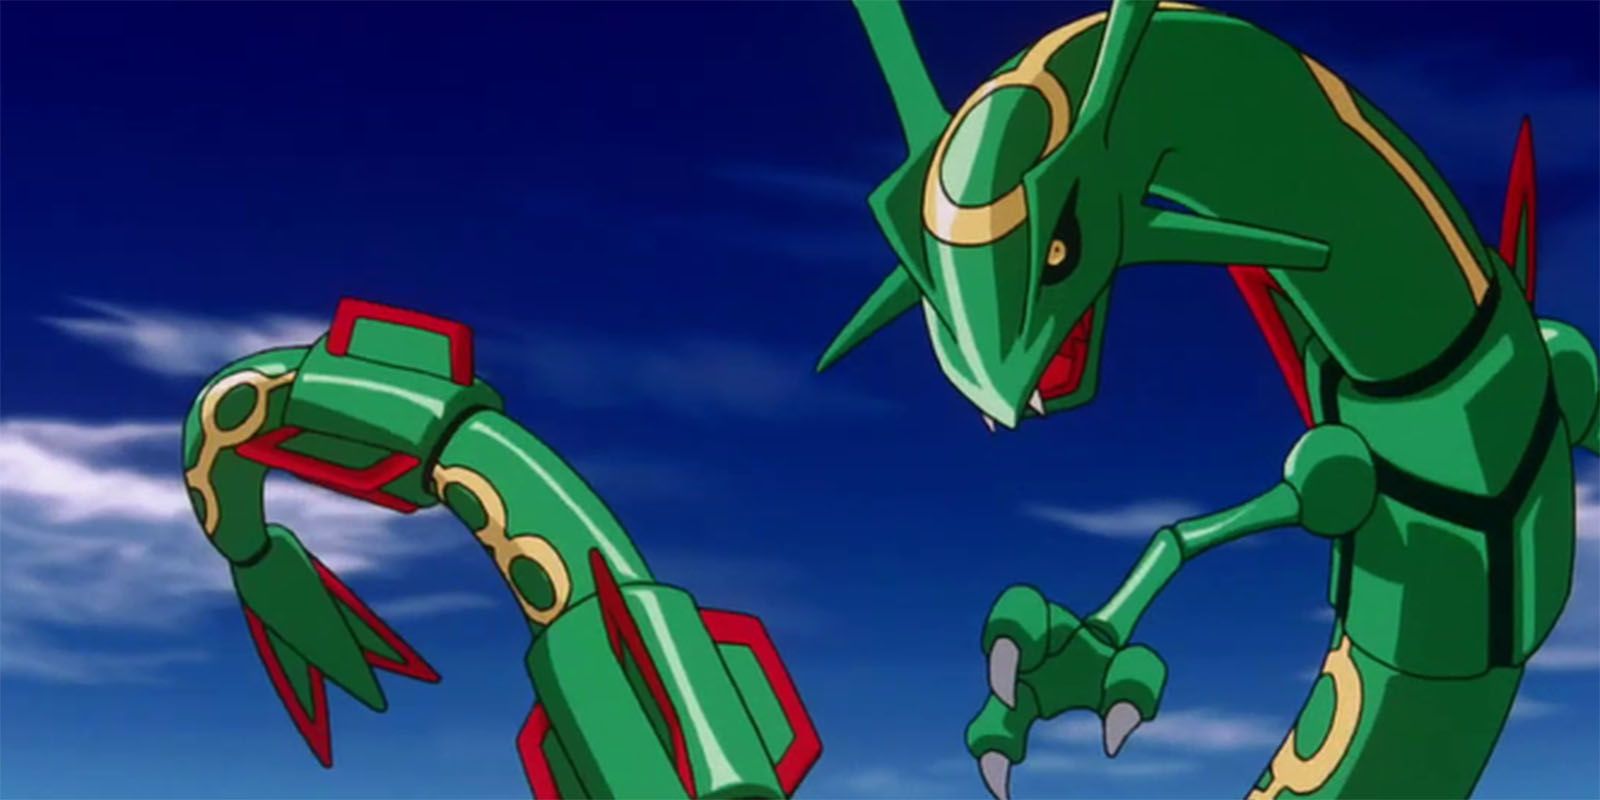 Rayquaza from the Pokemon anime.